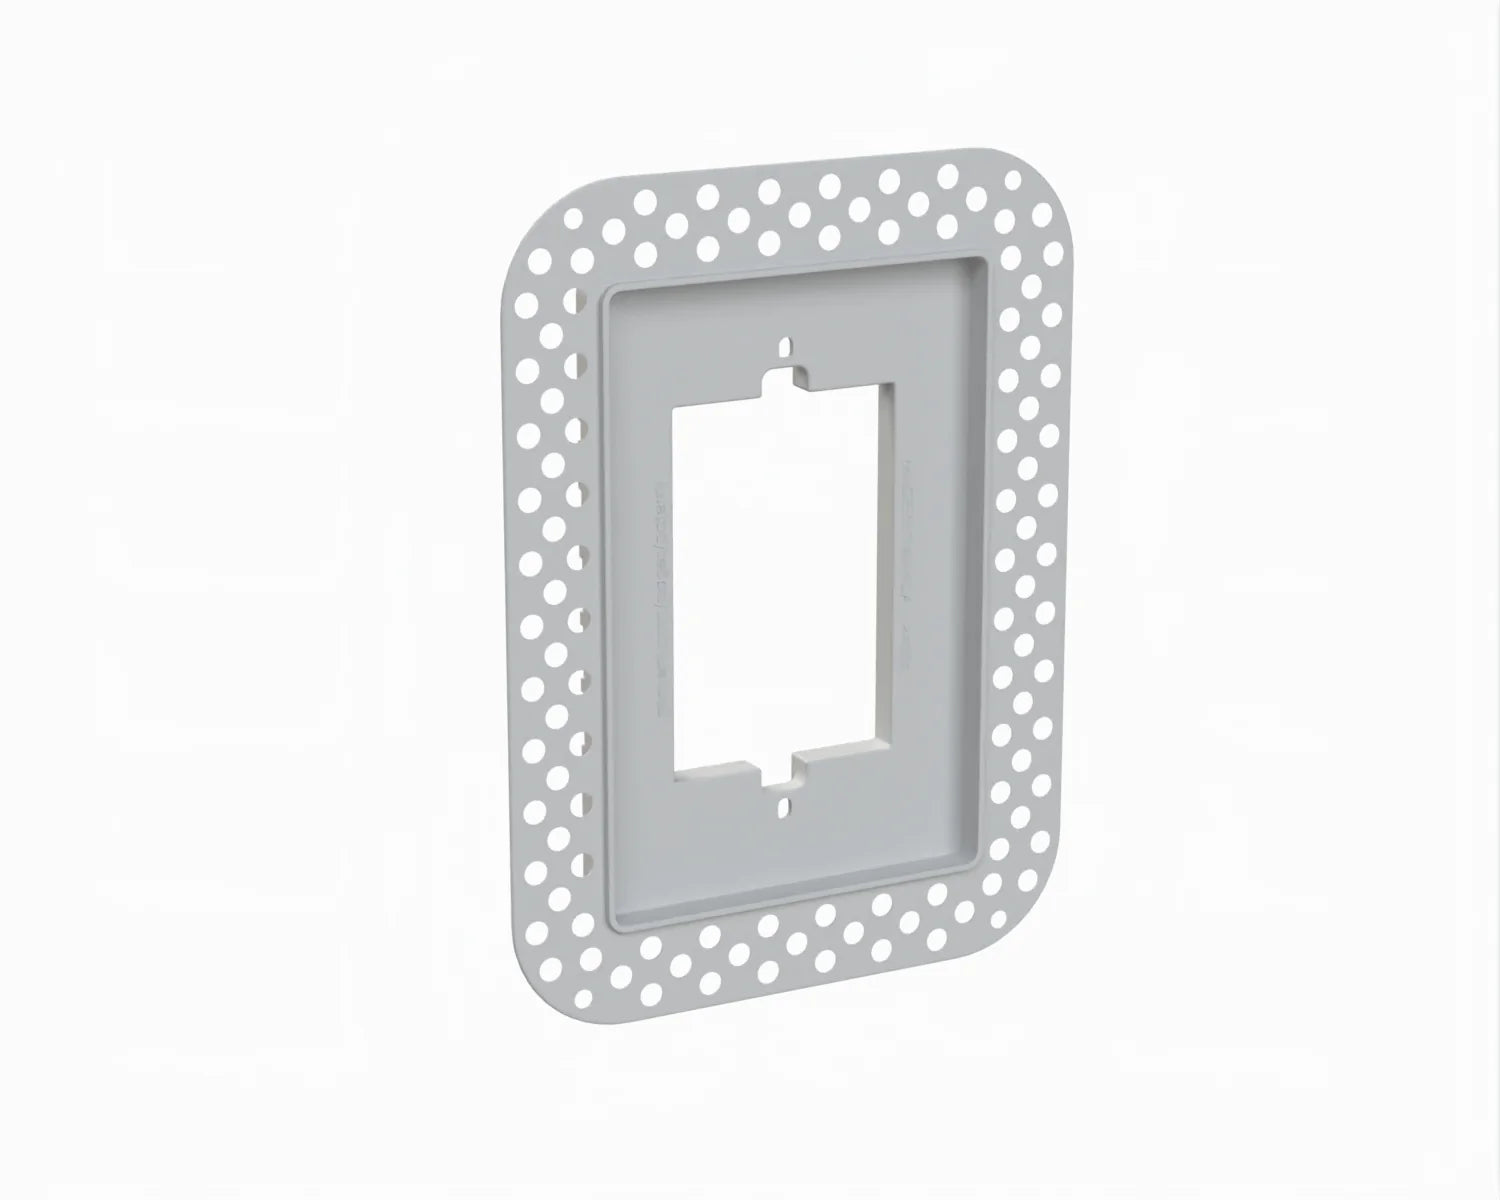 Fittes Flush Drywall Receptacle Mount [Lite]